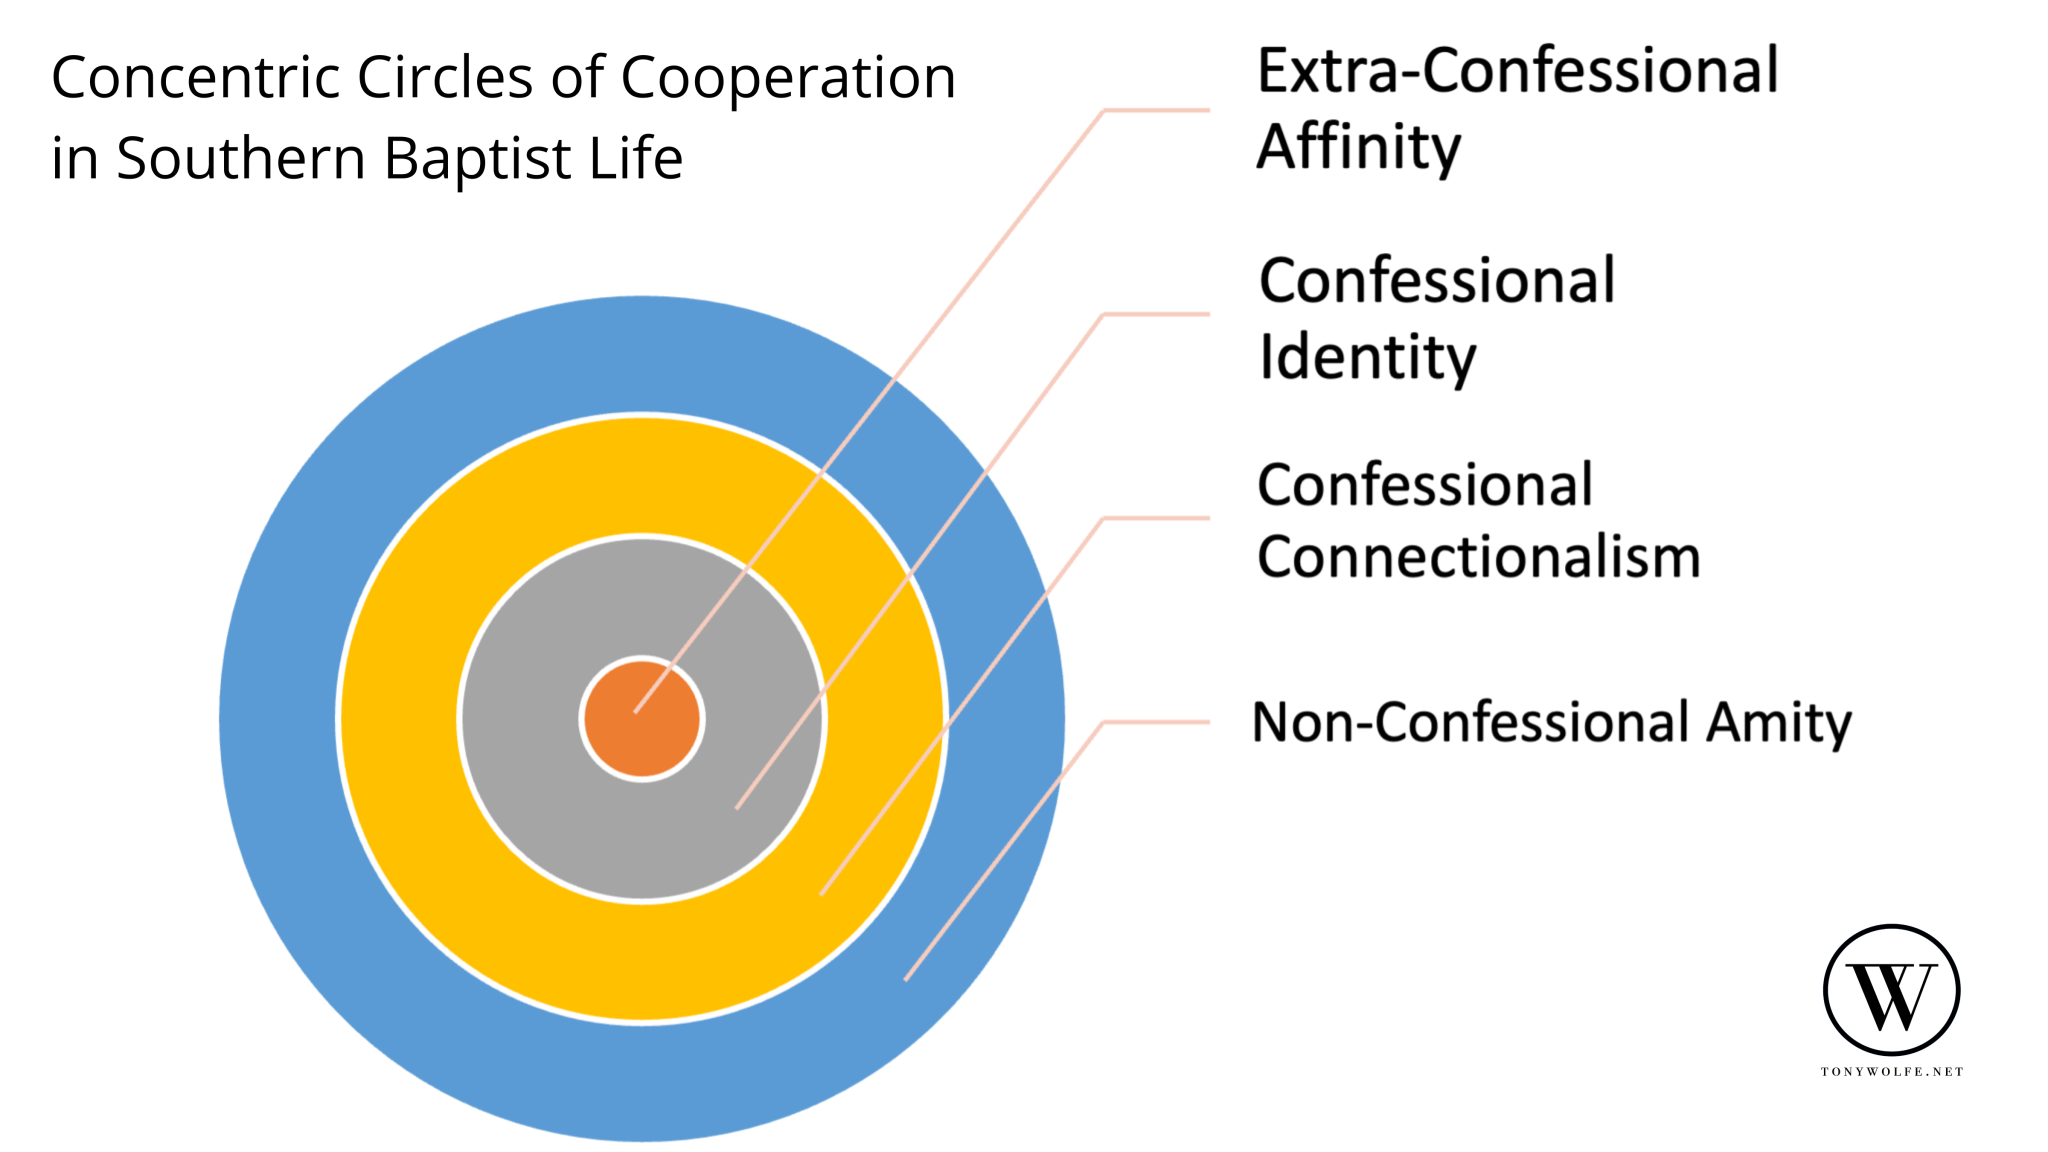 Concentric circles of cooperation in Southern Baptist life